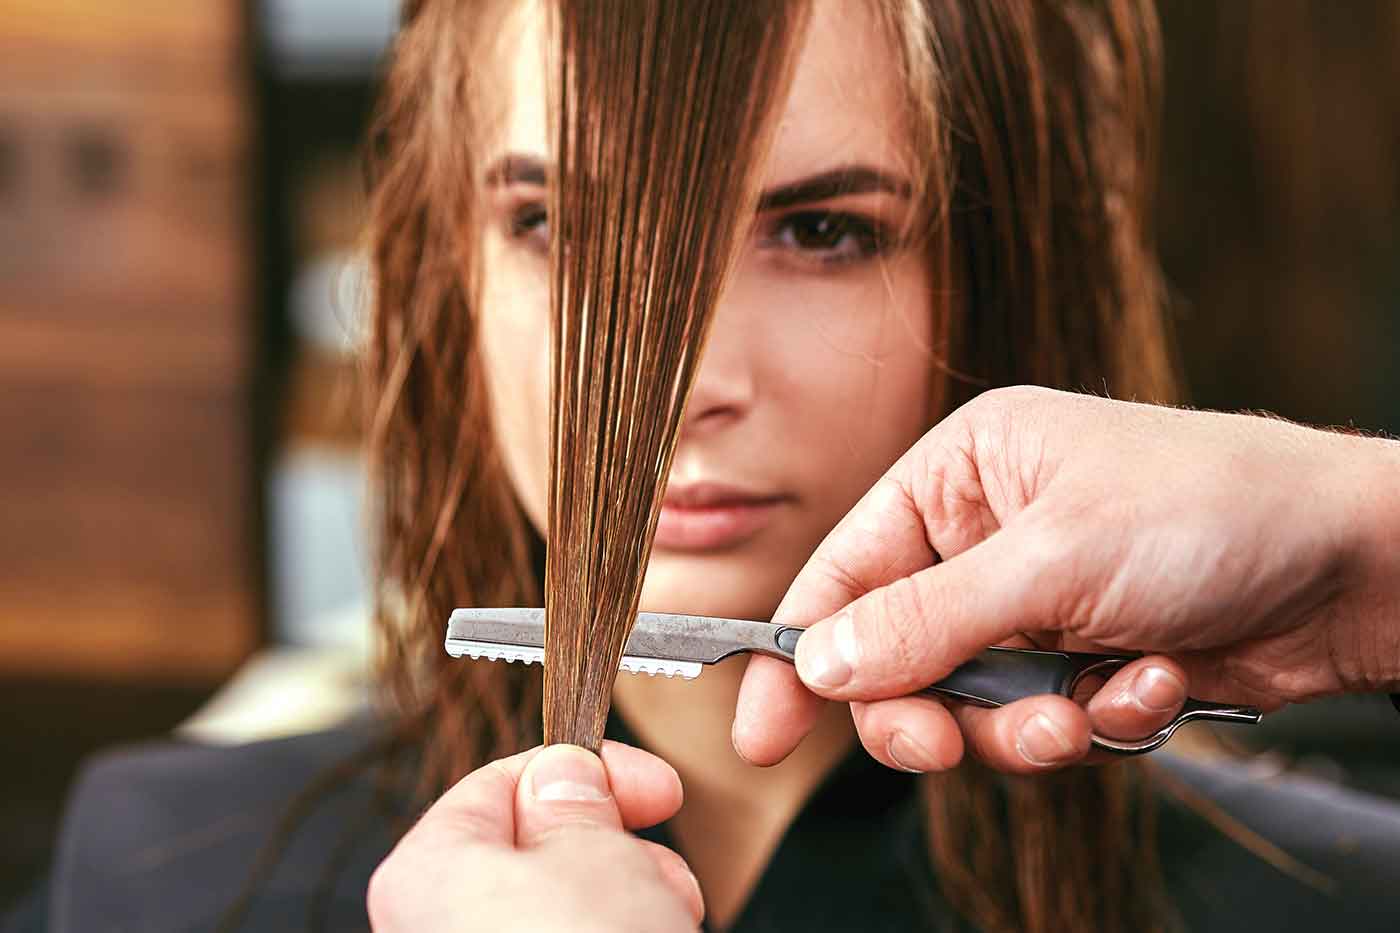 How to Razor cut the Hair: Do’s and Don’t